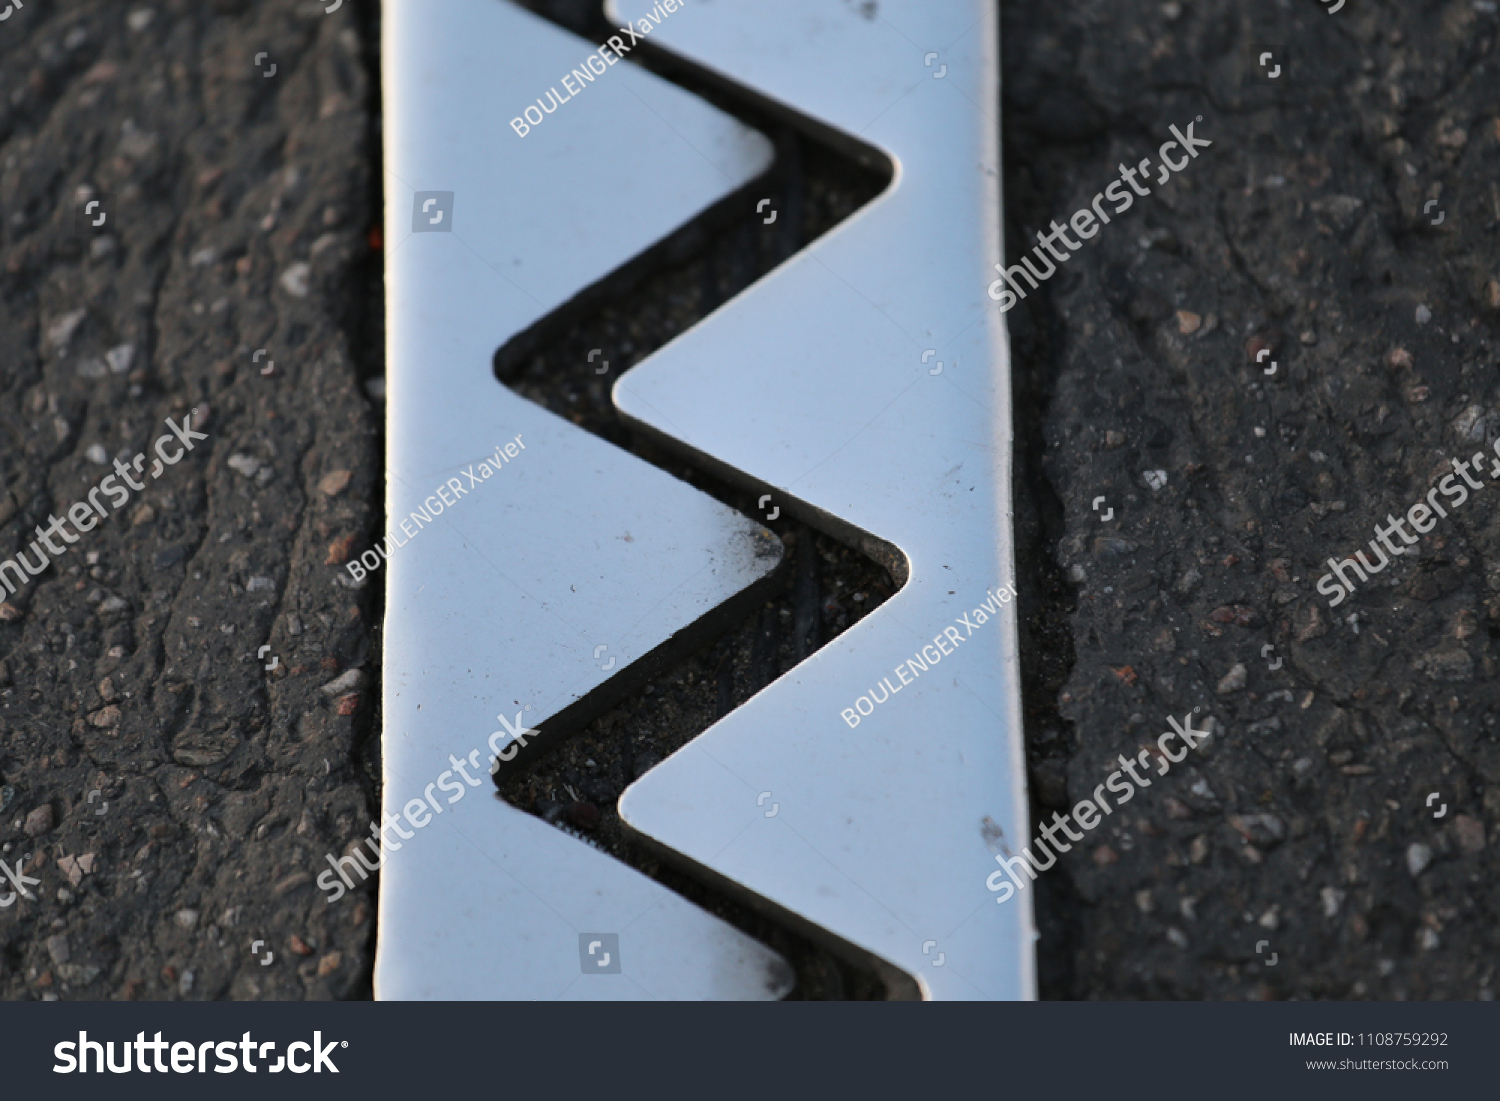 Close up outdoor view from above of an iron dilatation joint placed on a bridge road. Zigzag line drawn of an bright steel surface. Abstract design with grey geometric shapes on the asphalt ground.   #1108759292